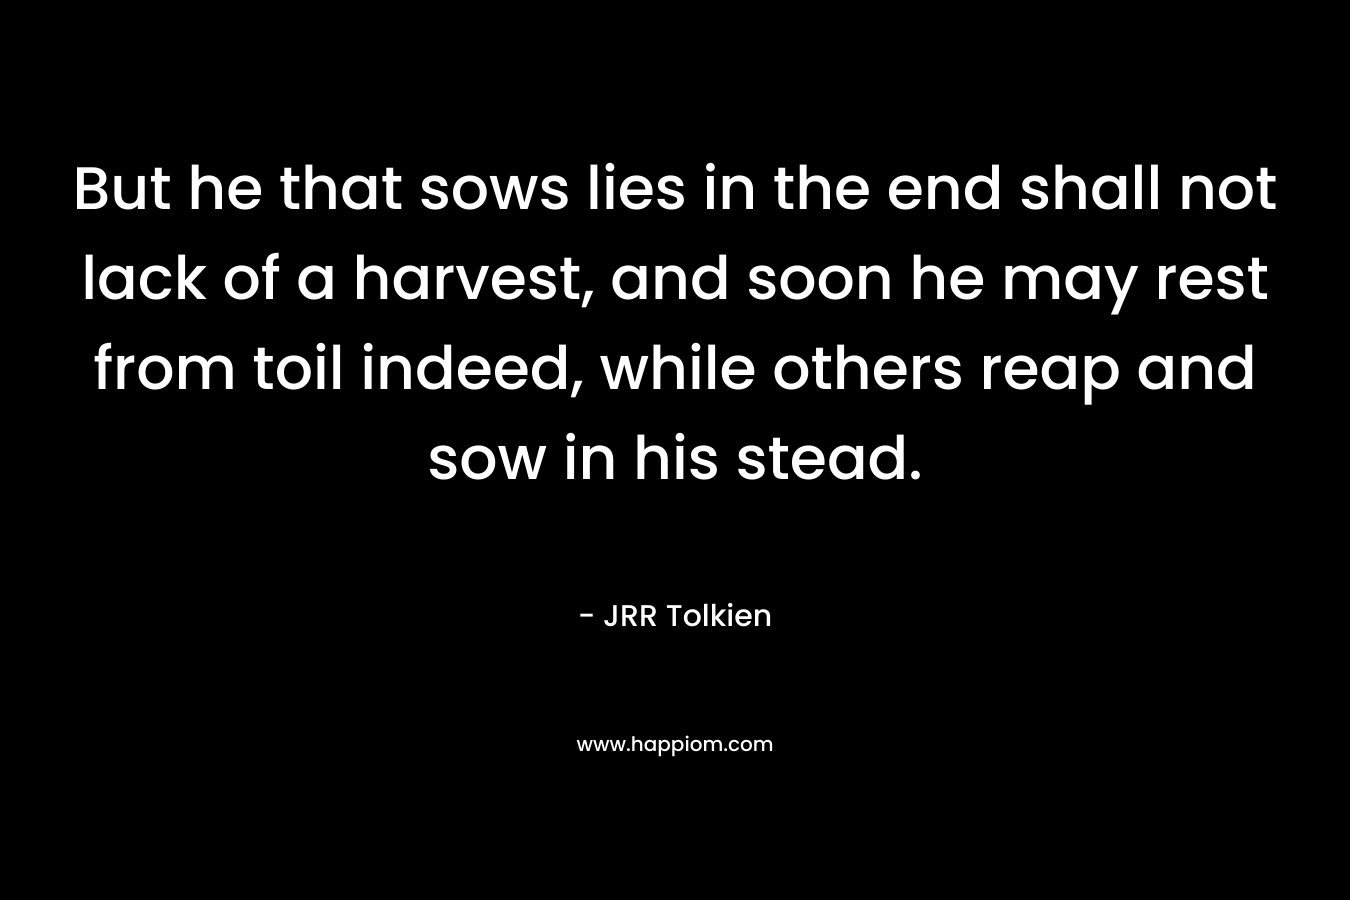 But he that sows lies in the end shall not lack of a harvest, and soon he may rest from toil indeed, while others reap and sow in his stead.